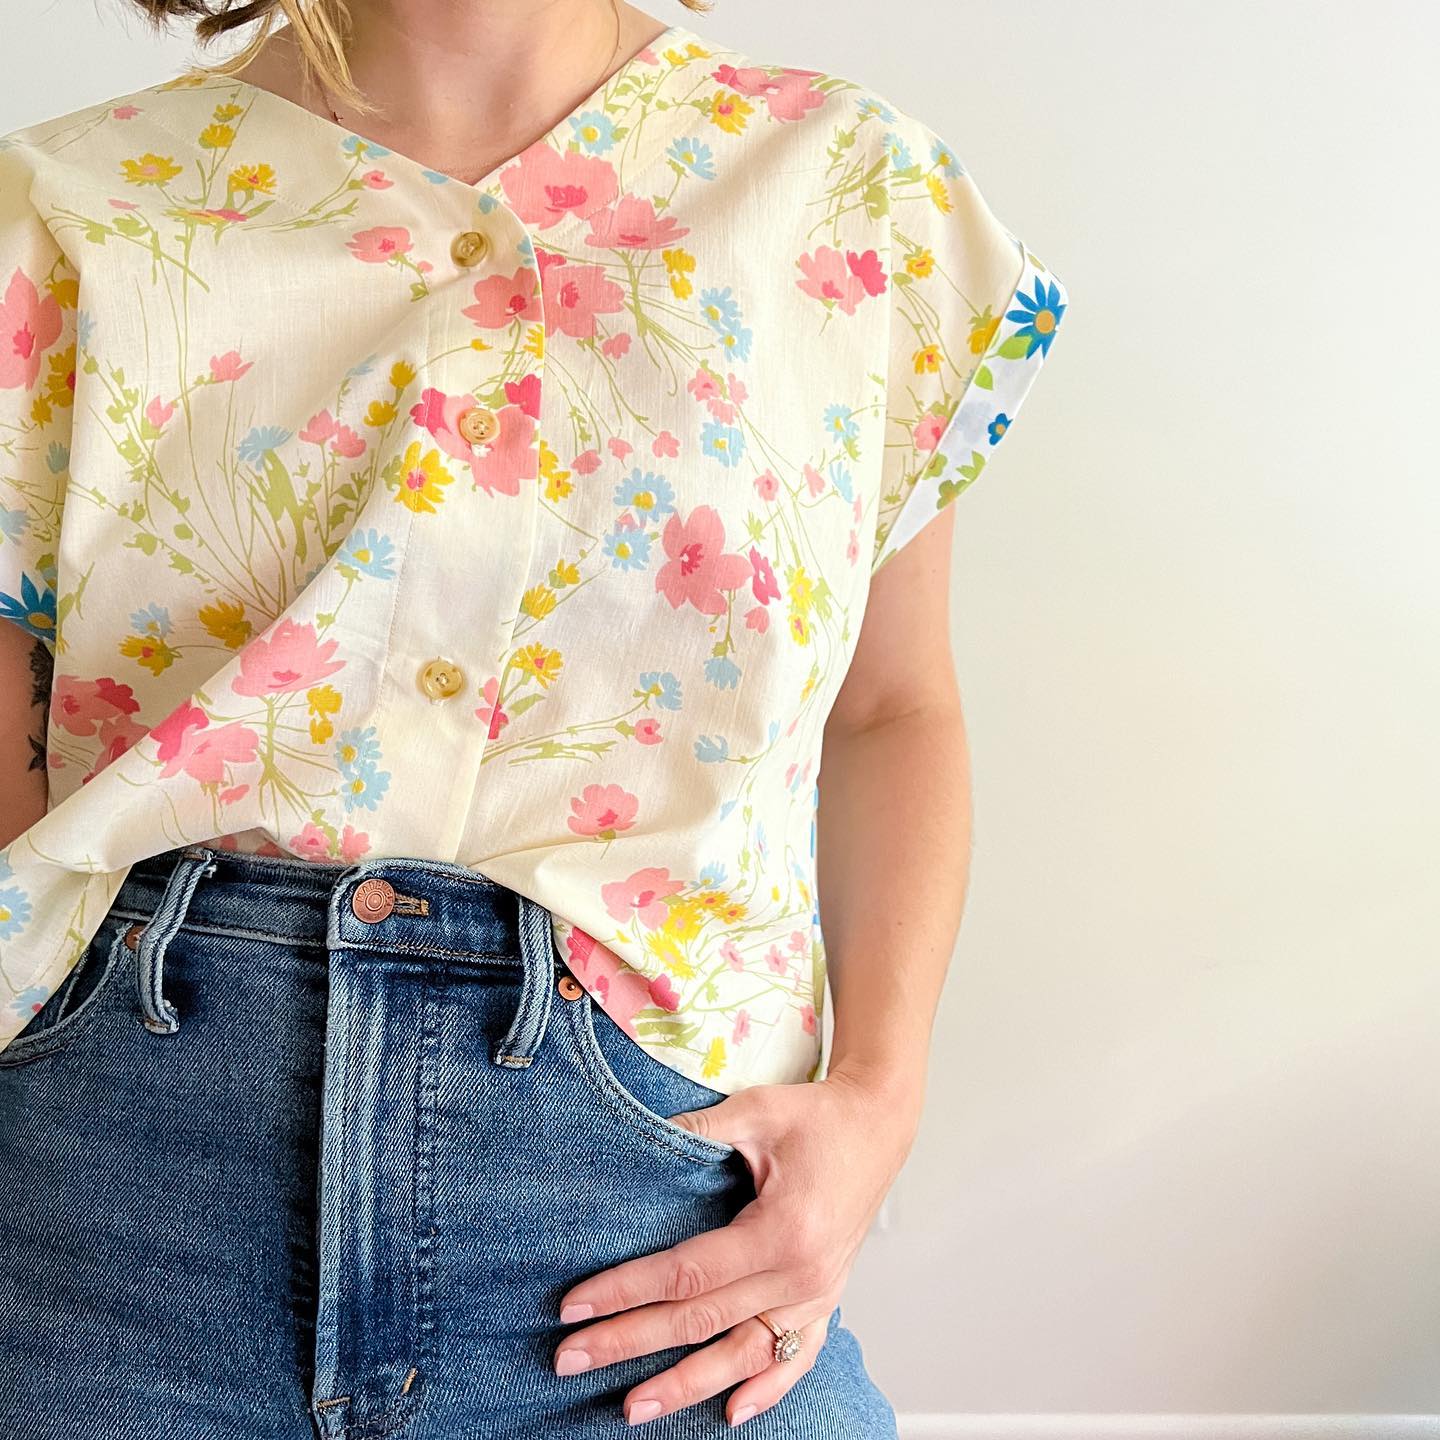 For Mother’s Day I asked for a day alone and here’s a peek at how I spent my time…making this top out of pillowcases from the 60s and 70s. More details to come! #sarahheartssews
.
#babylockambassador #babylocksewing #isewmyownclothes #memademay2022